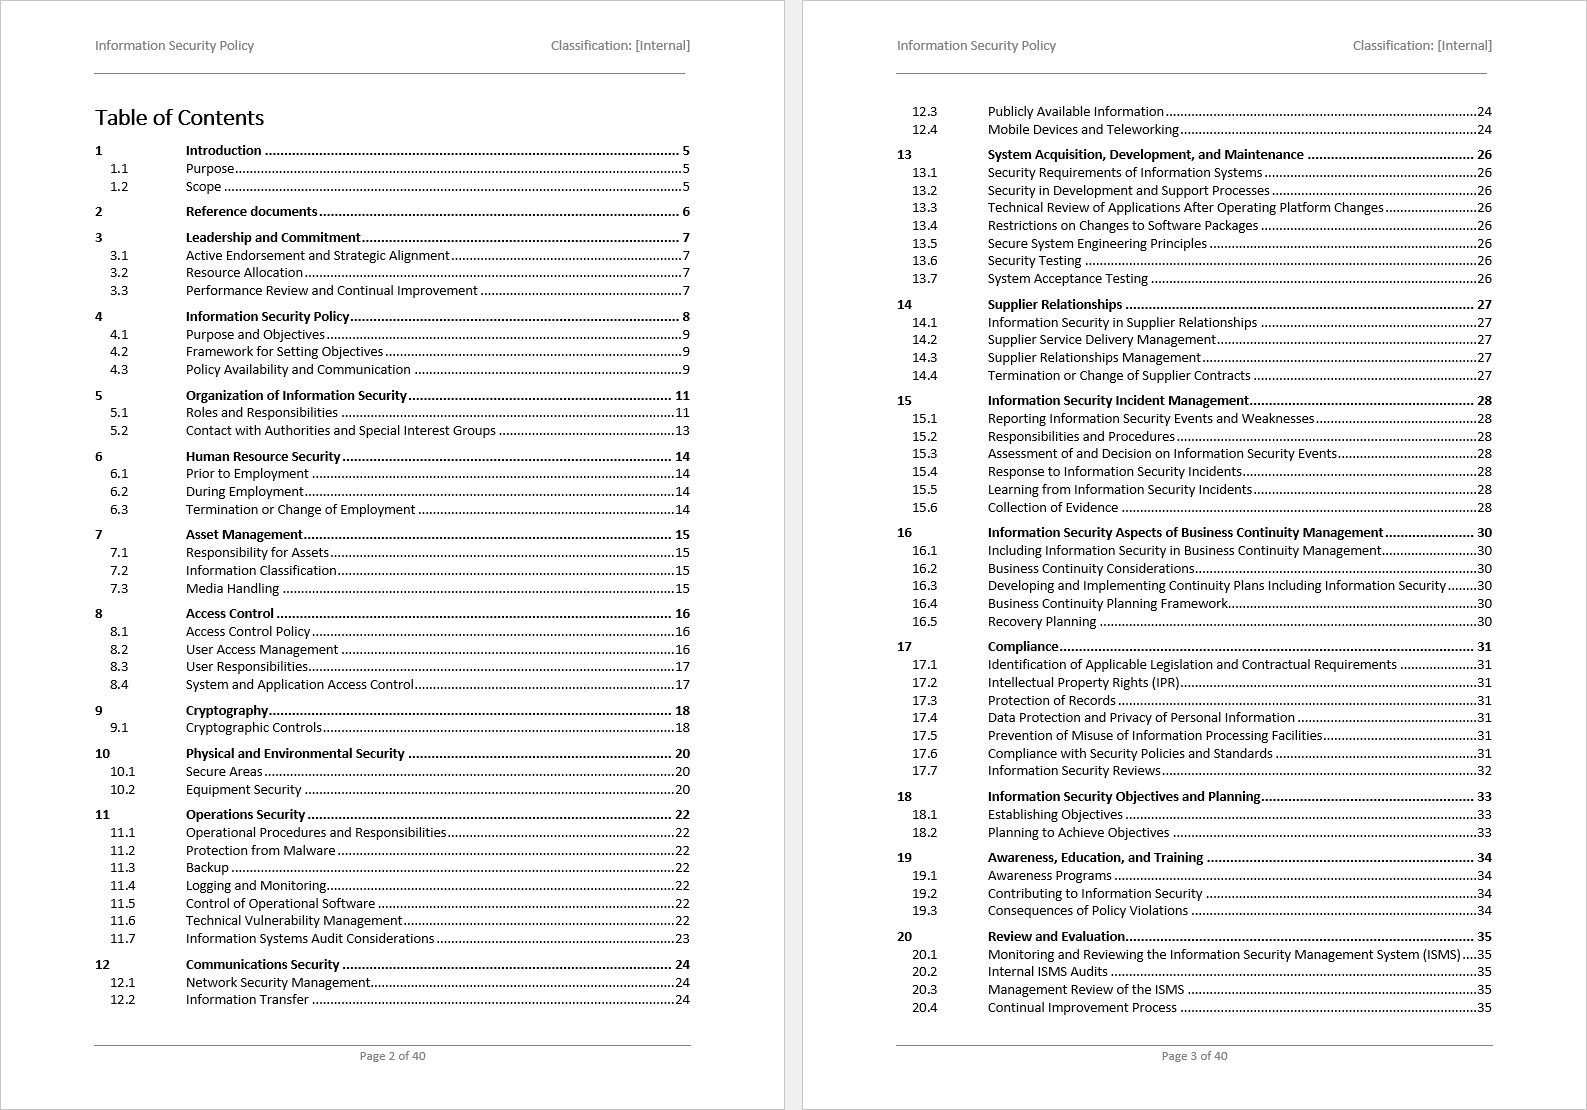 information security policy table of contents template